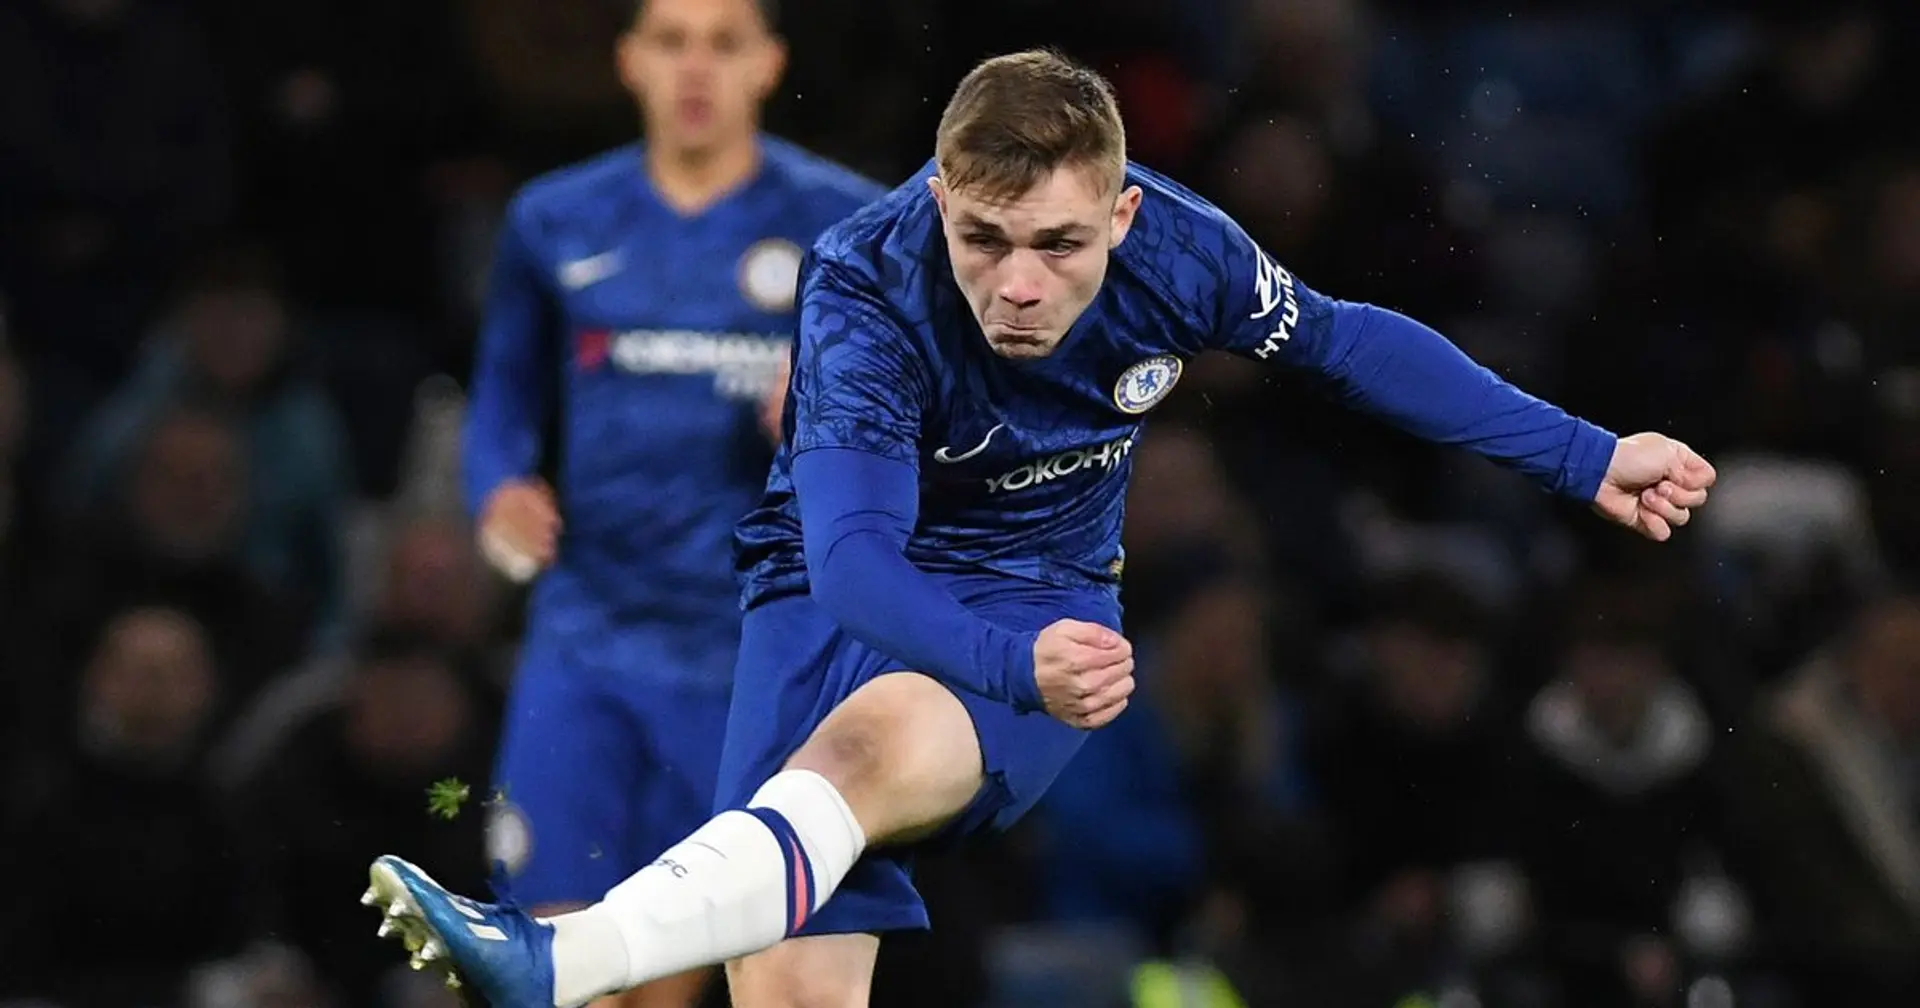 Several clubs approach Chelsea about potential loan for academy gem Lewis Bate (reliability: 5 stars)